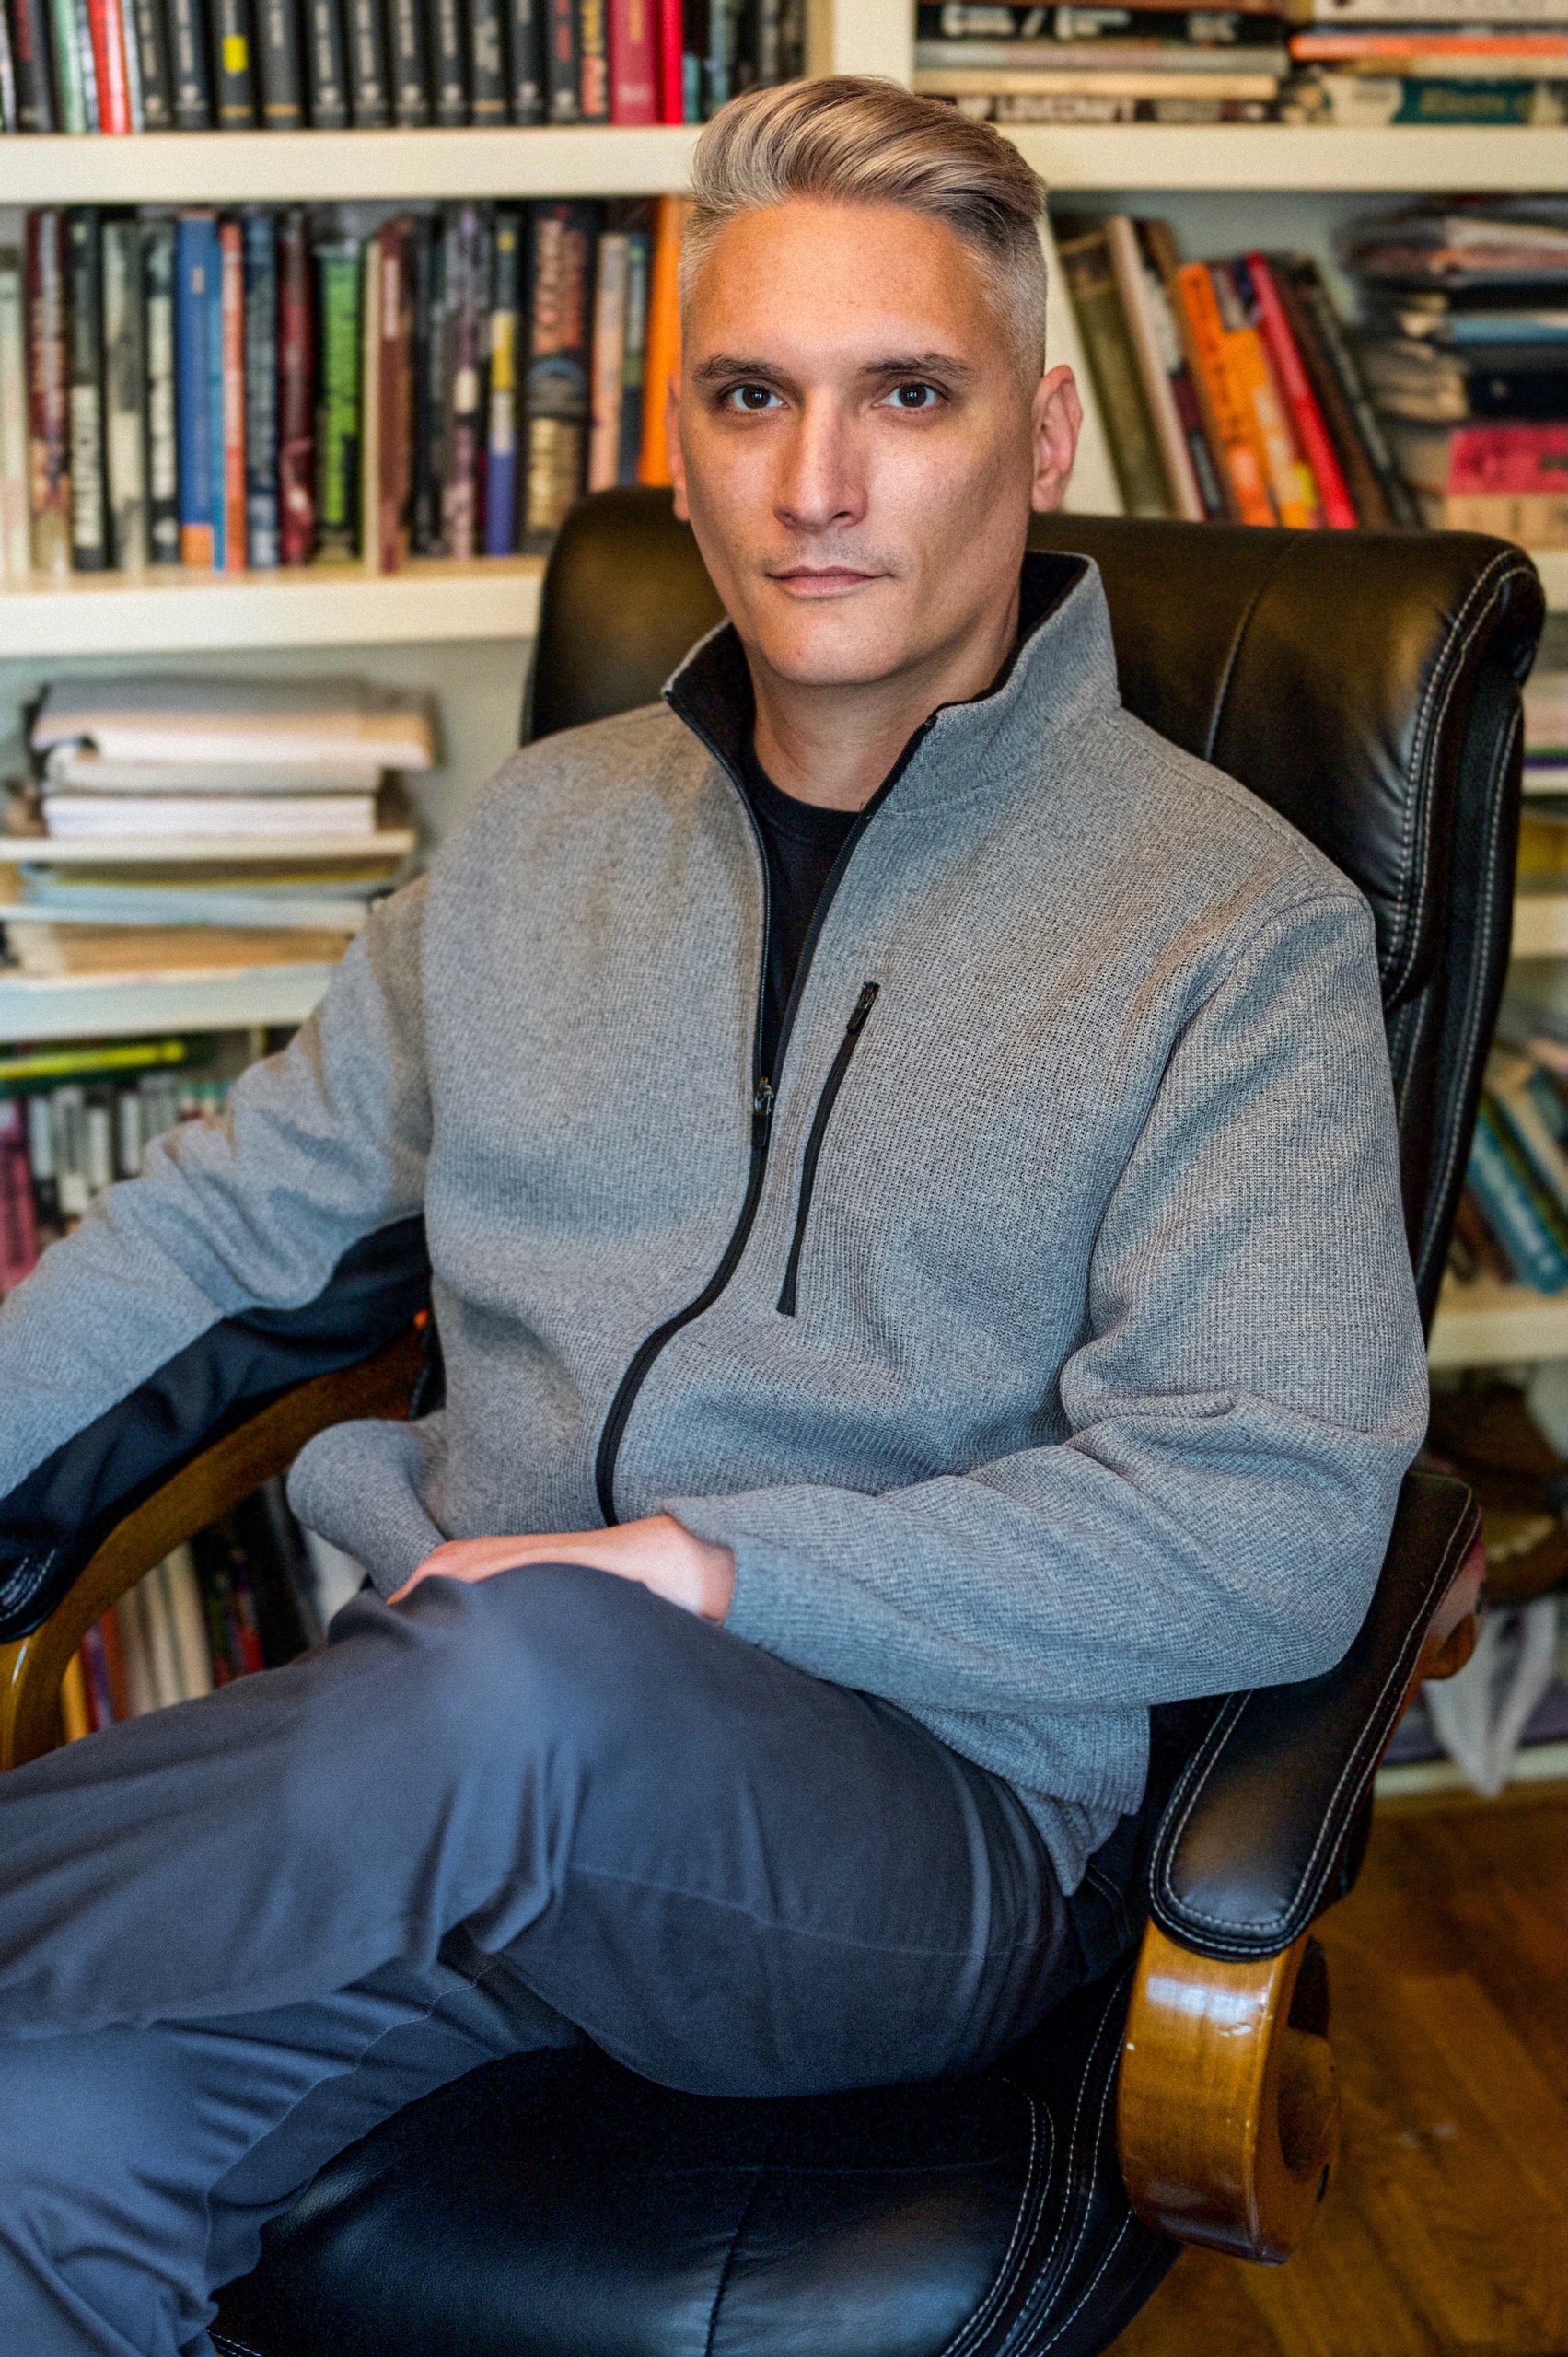  Author, researcher, and intelligence analyst Michael Kishbucher 